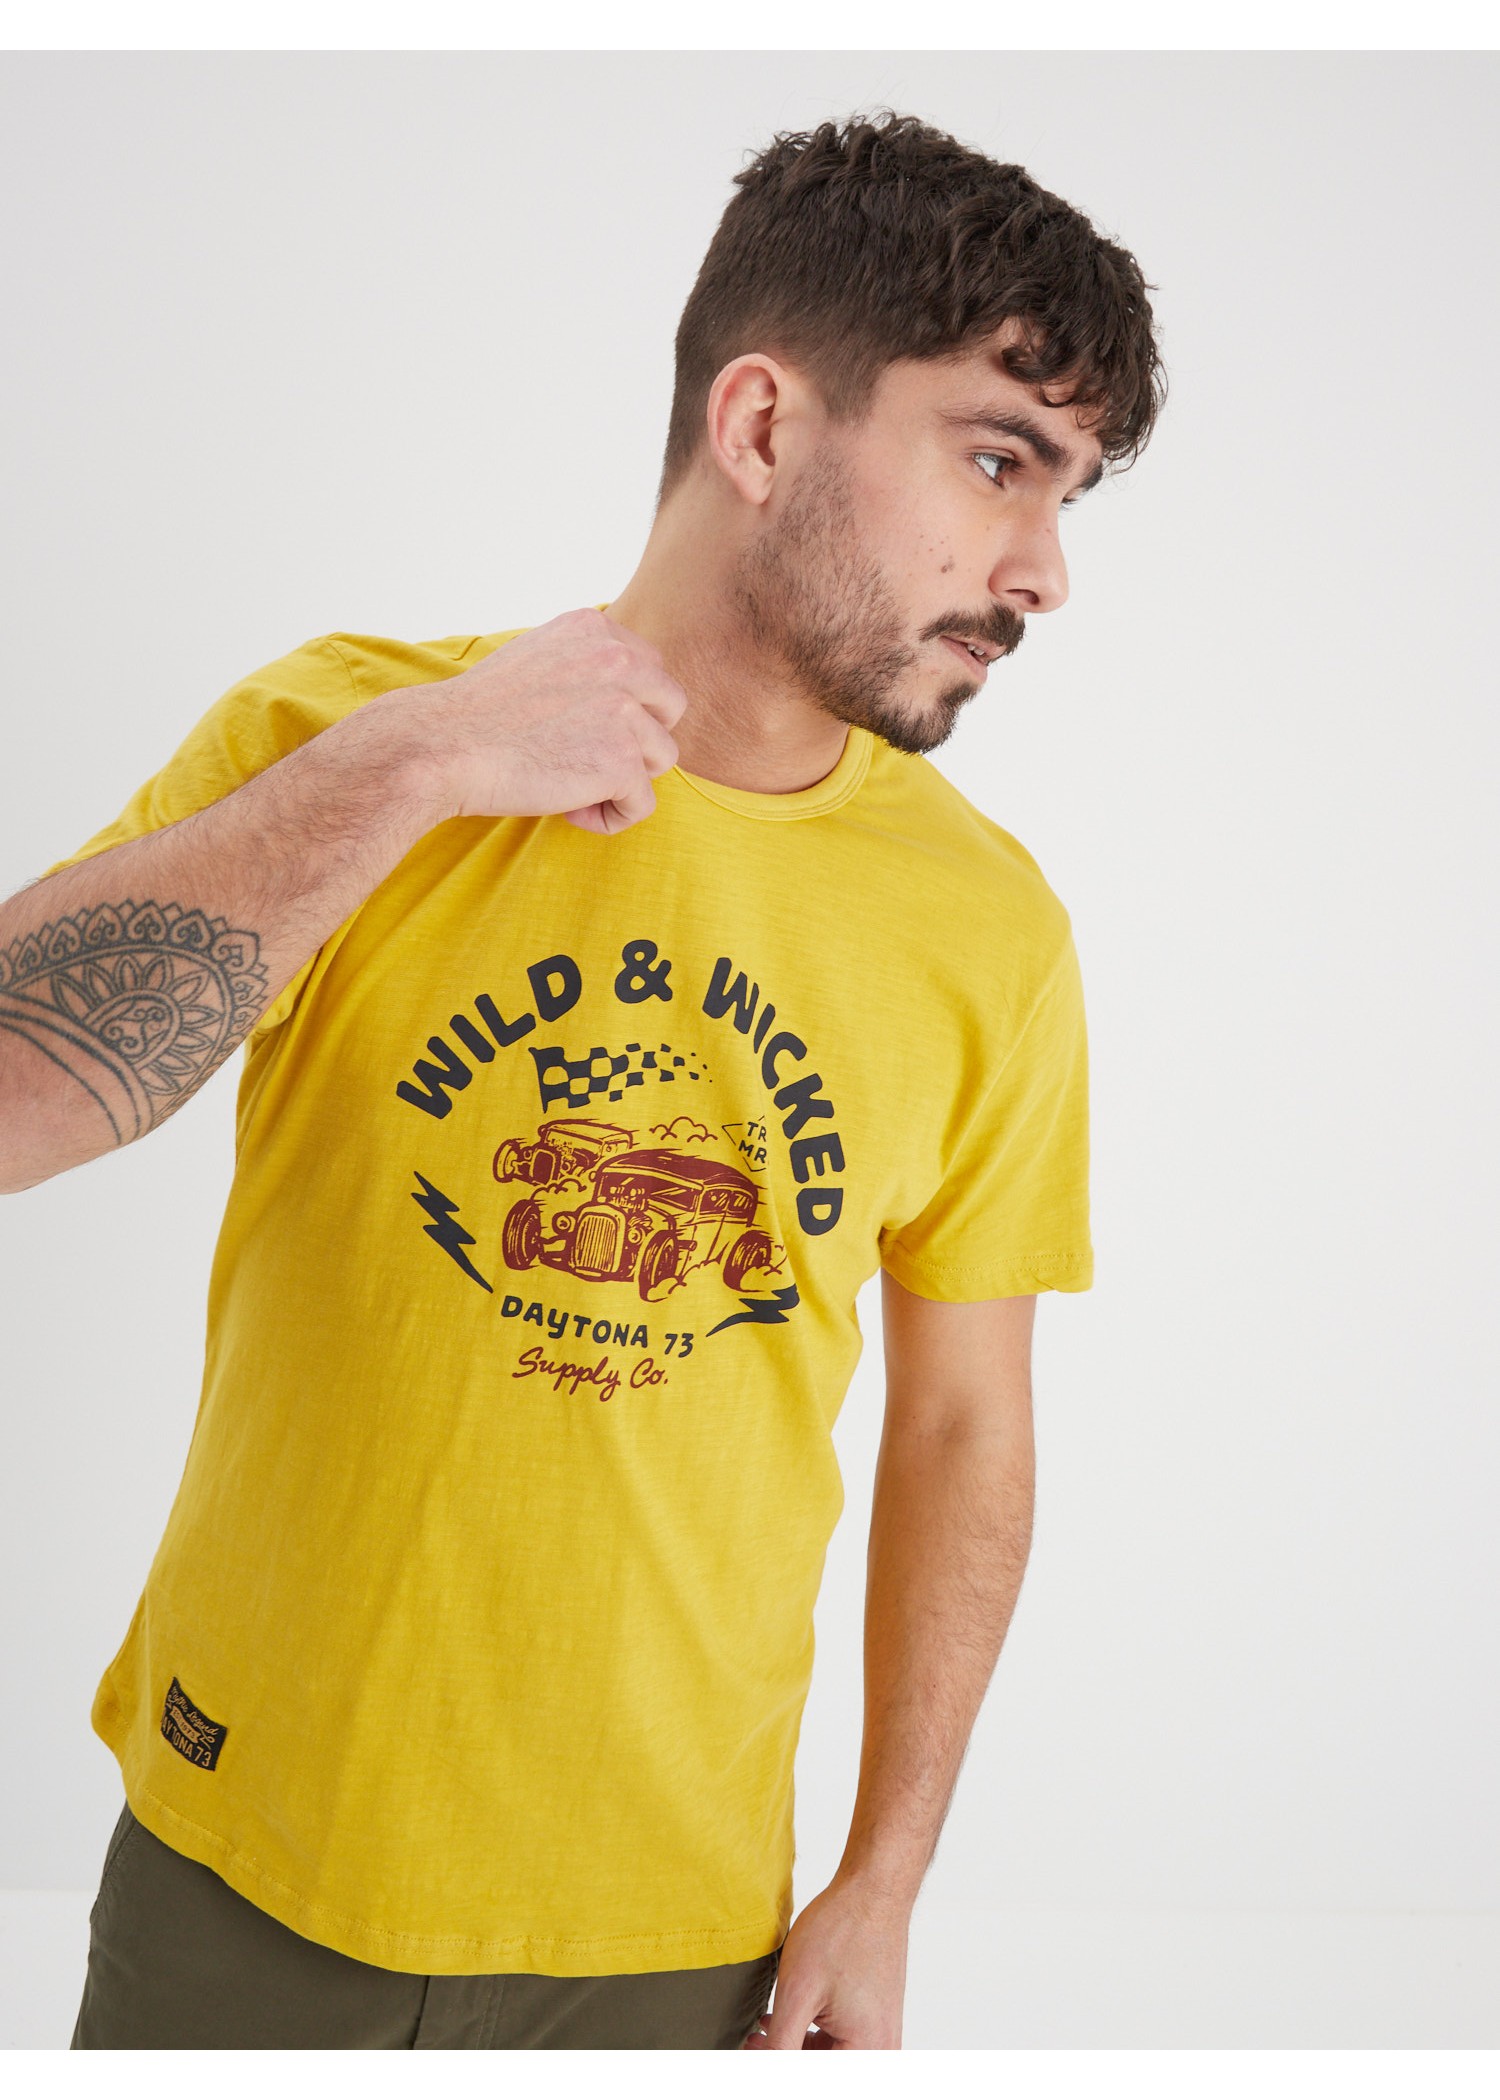 Wicked T-shirt Homme - Produits a traiter